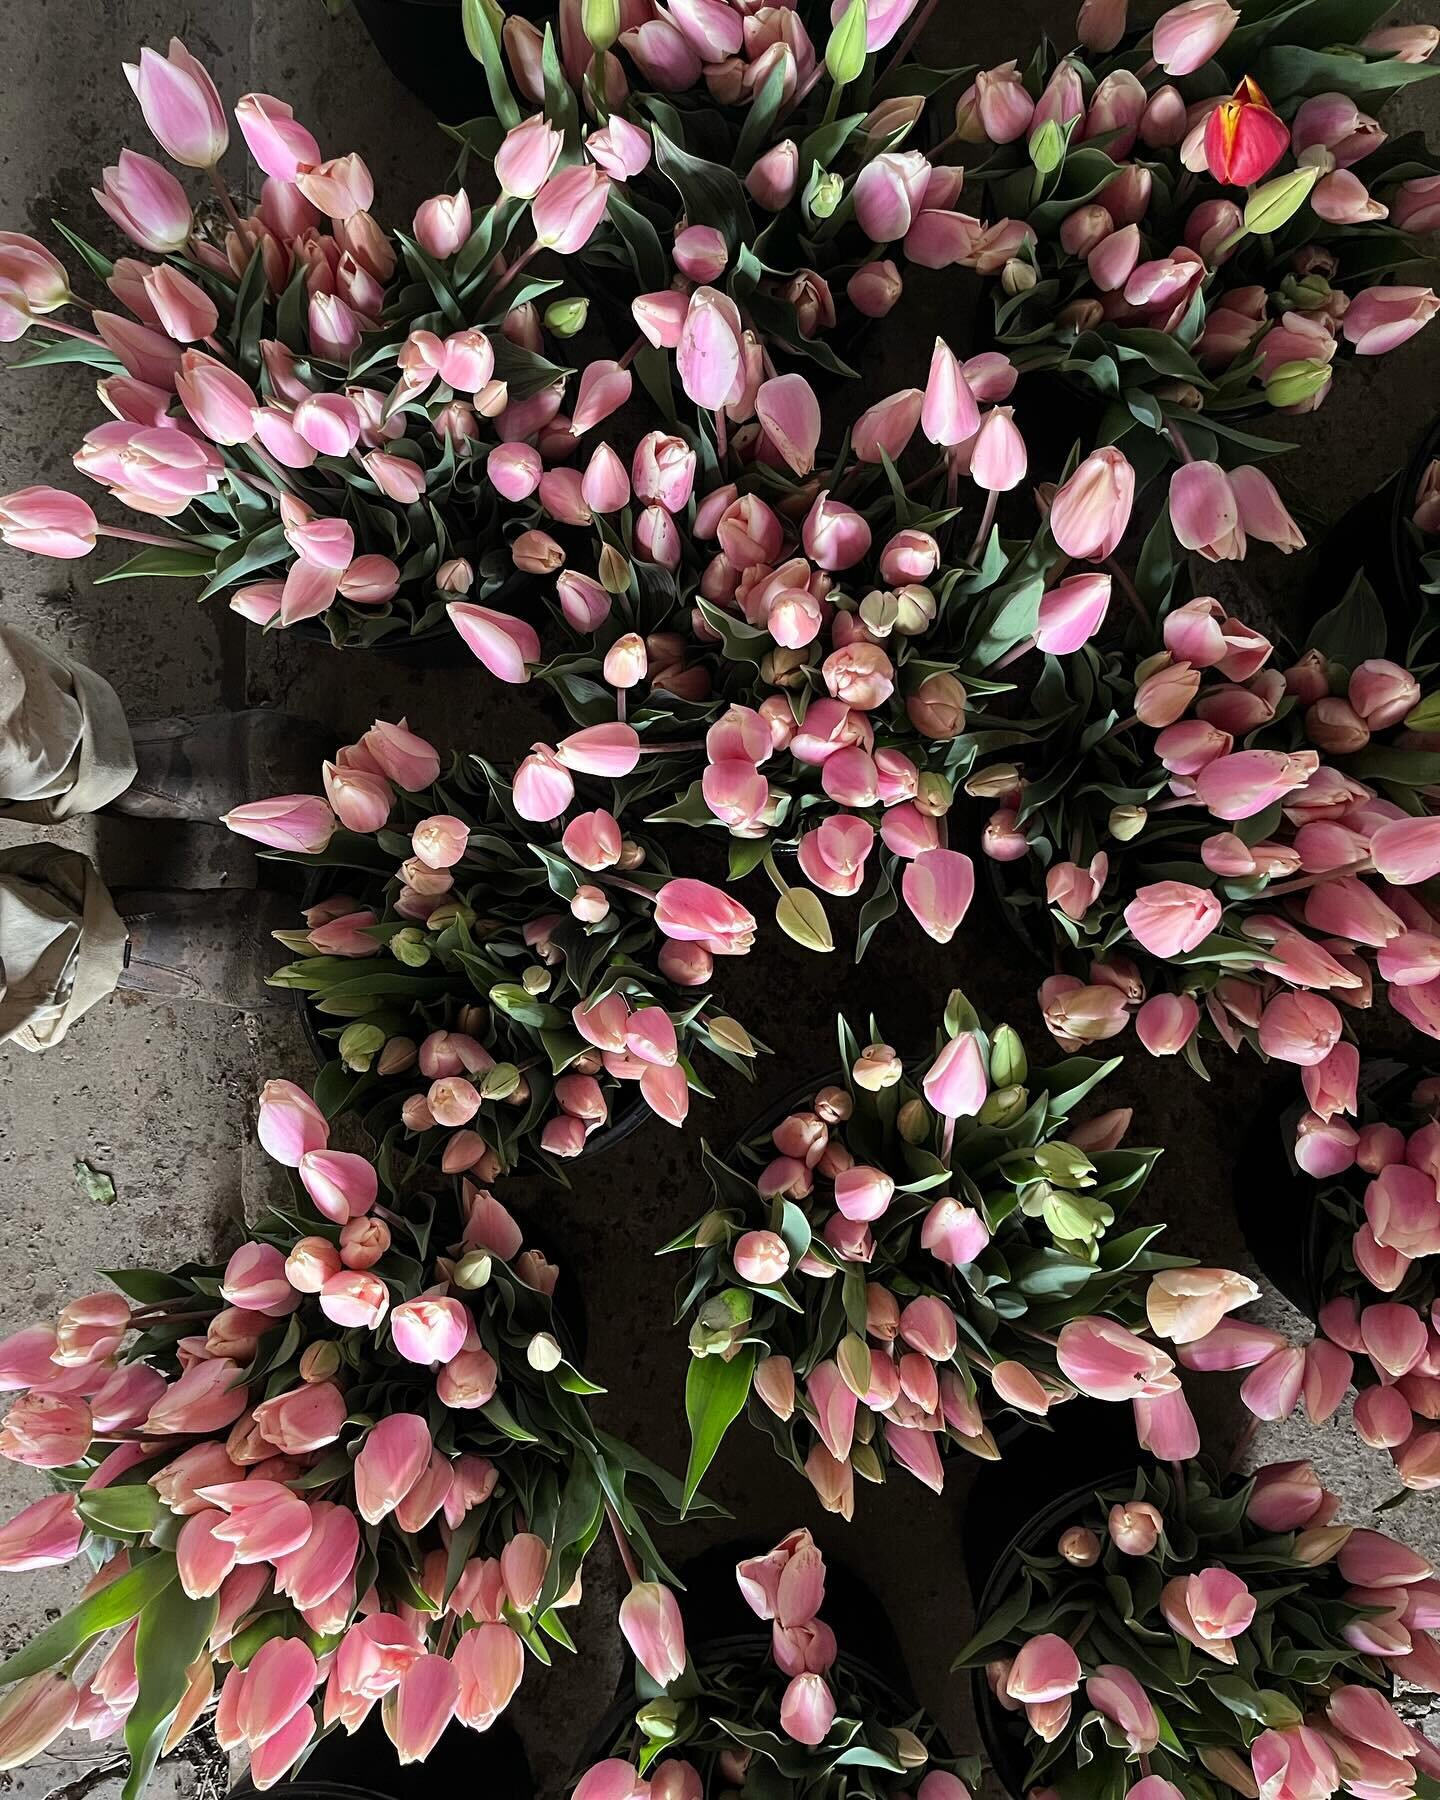 Nothin keeps you humble like farming! Lots of pretty pink tulips came on just a few days after Valentines Day 💓 these are all going to markets so go grab some and pretend this was a week ago!